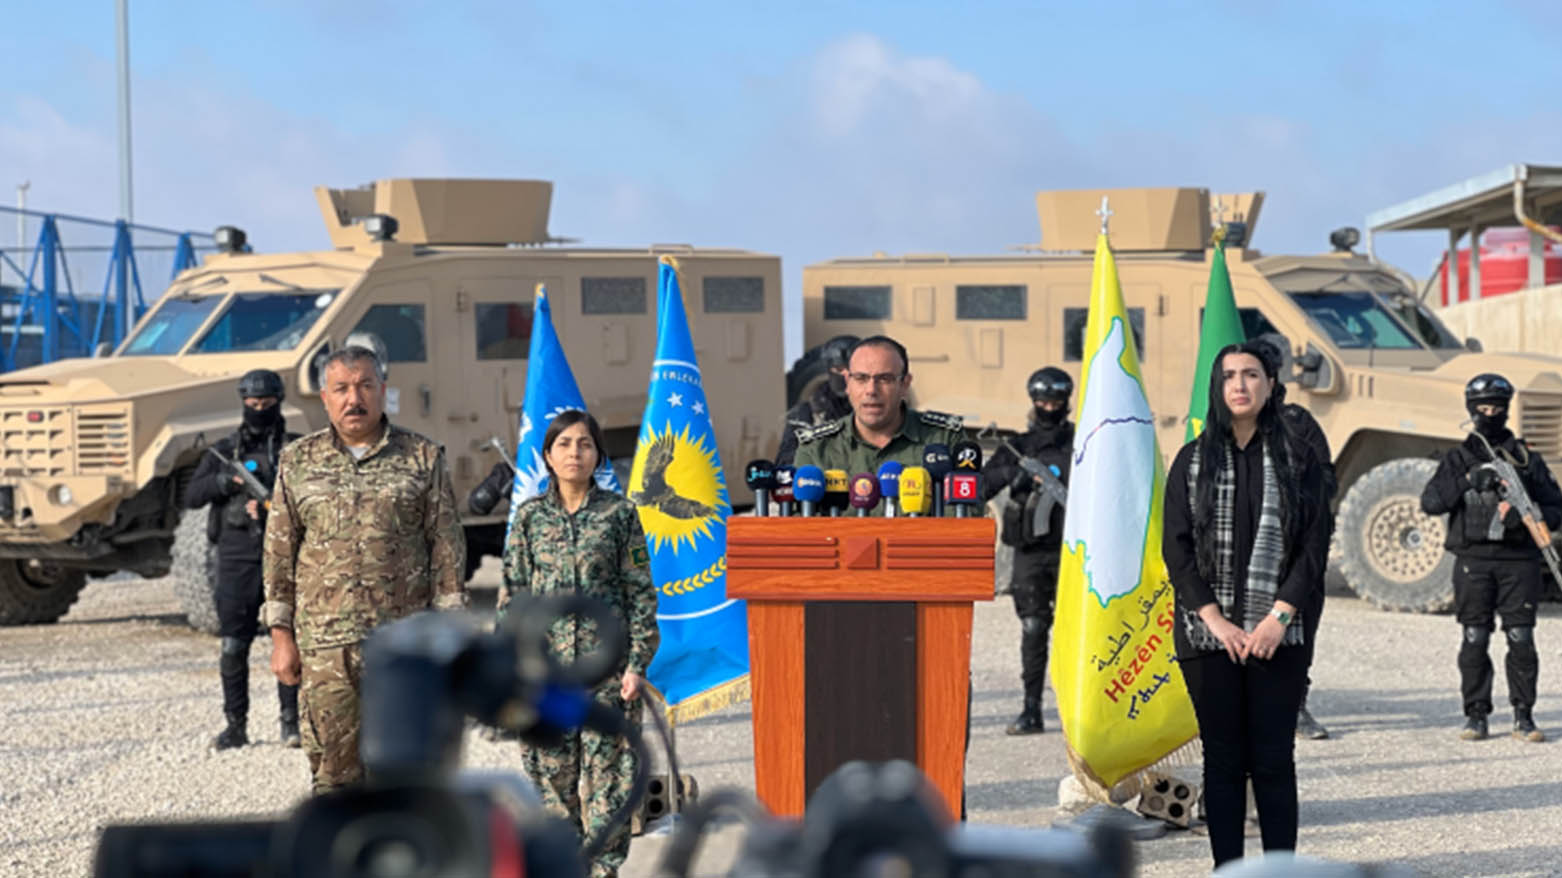 The SDF on Saturday launched an operation in Syria’s Al-Hol camp against ISIS cells (Photo: SDF Press).